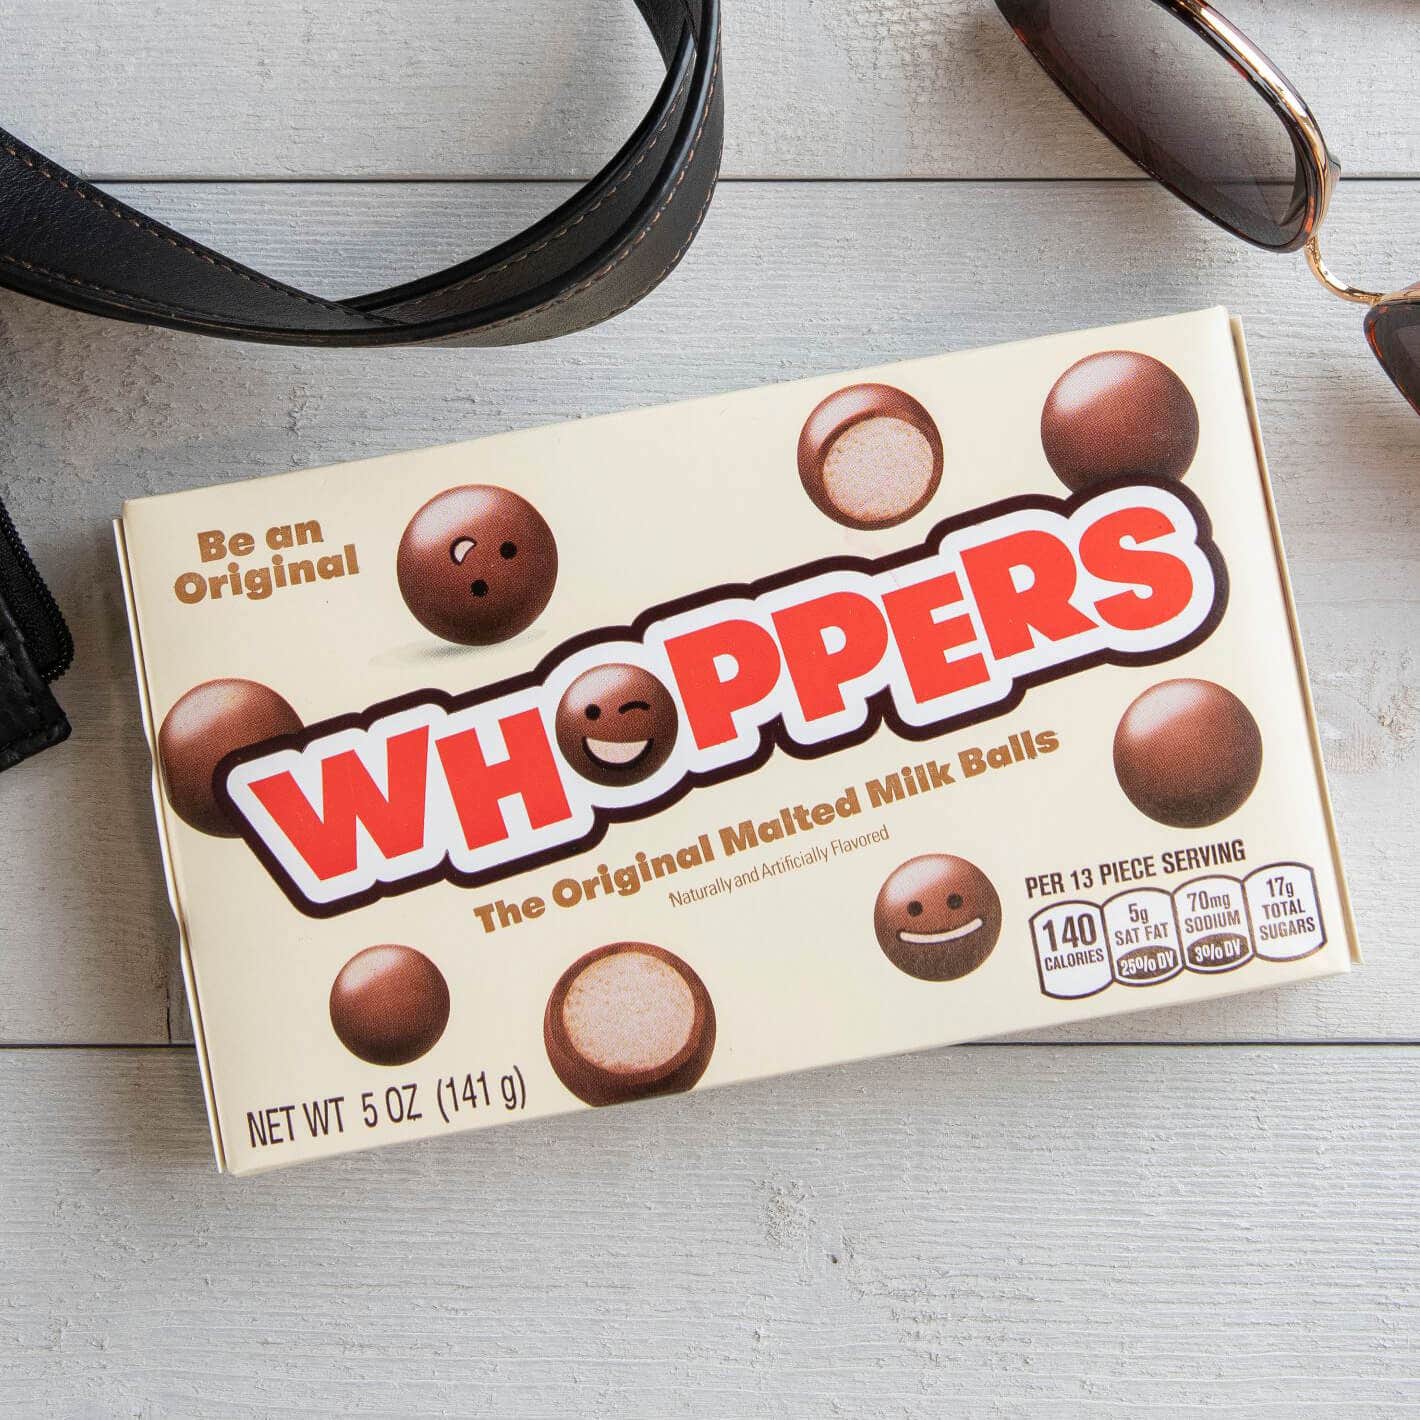 WHOPPERS box on table